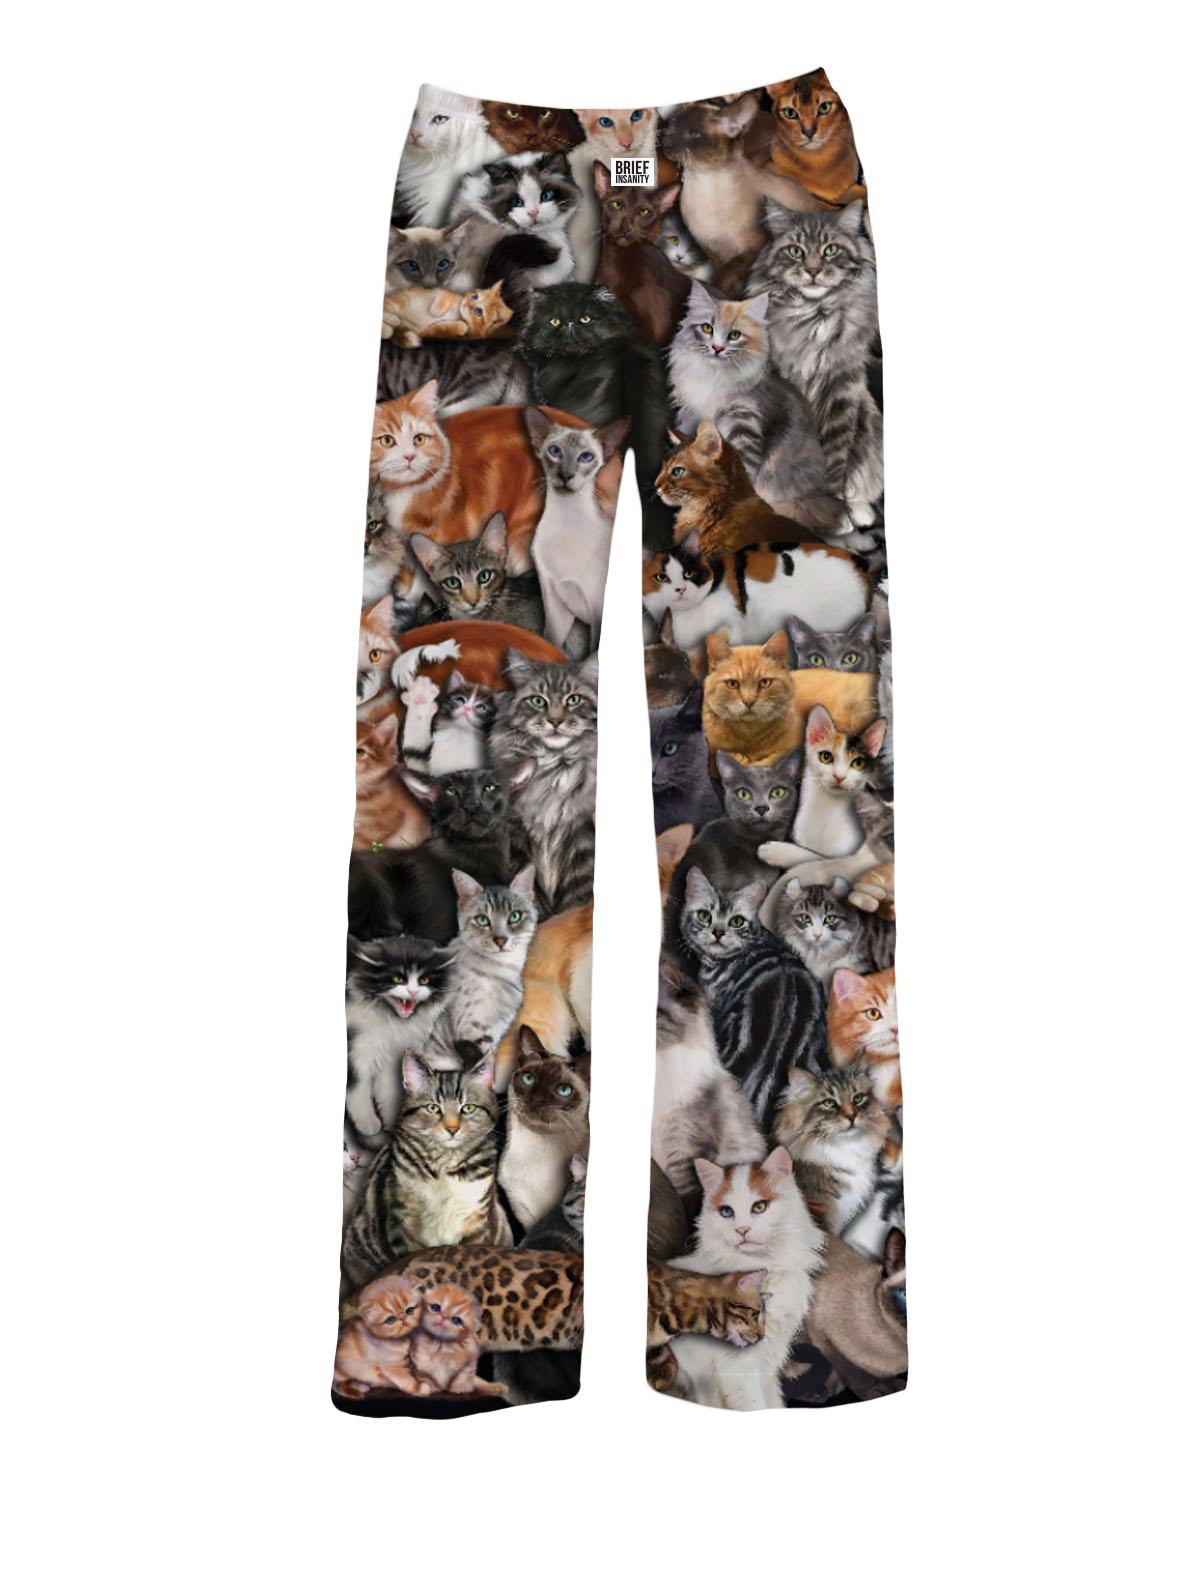 BRIEF INSANITY All Over Cat Pajama Lounge Pants